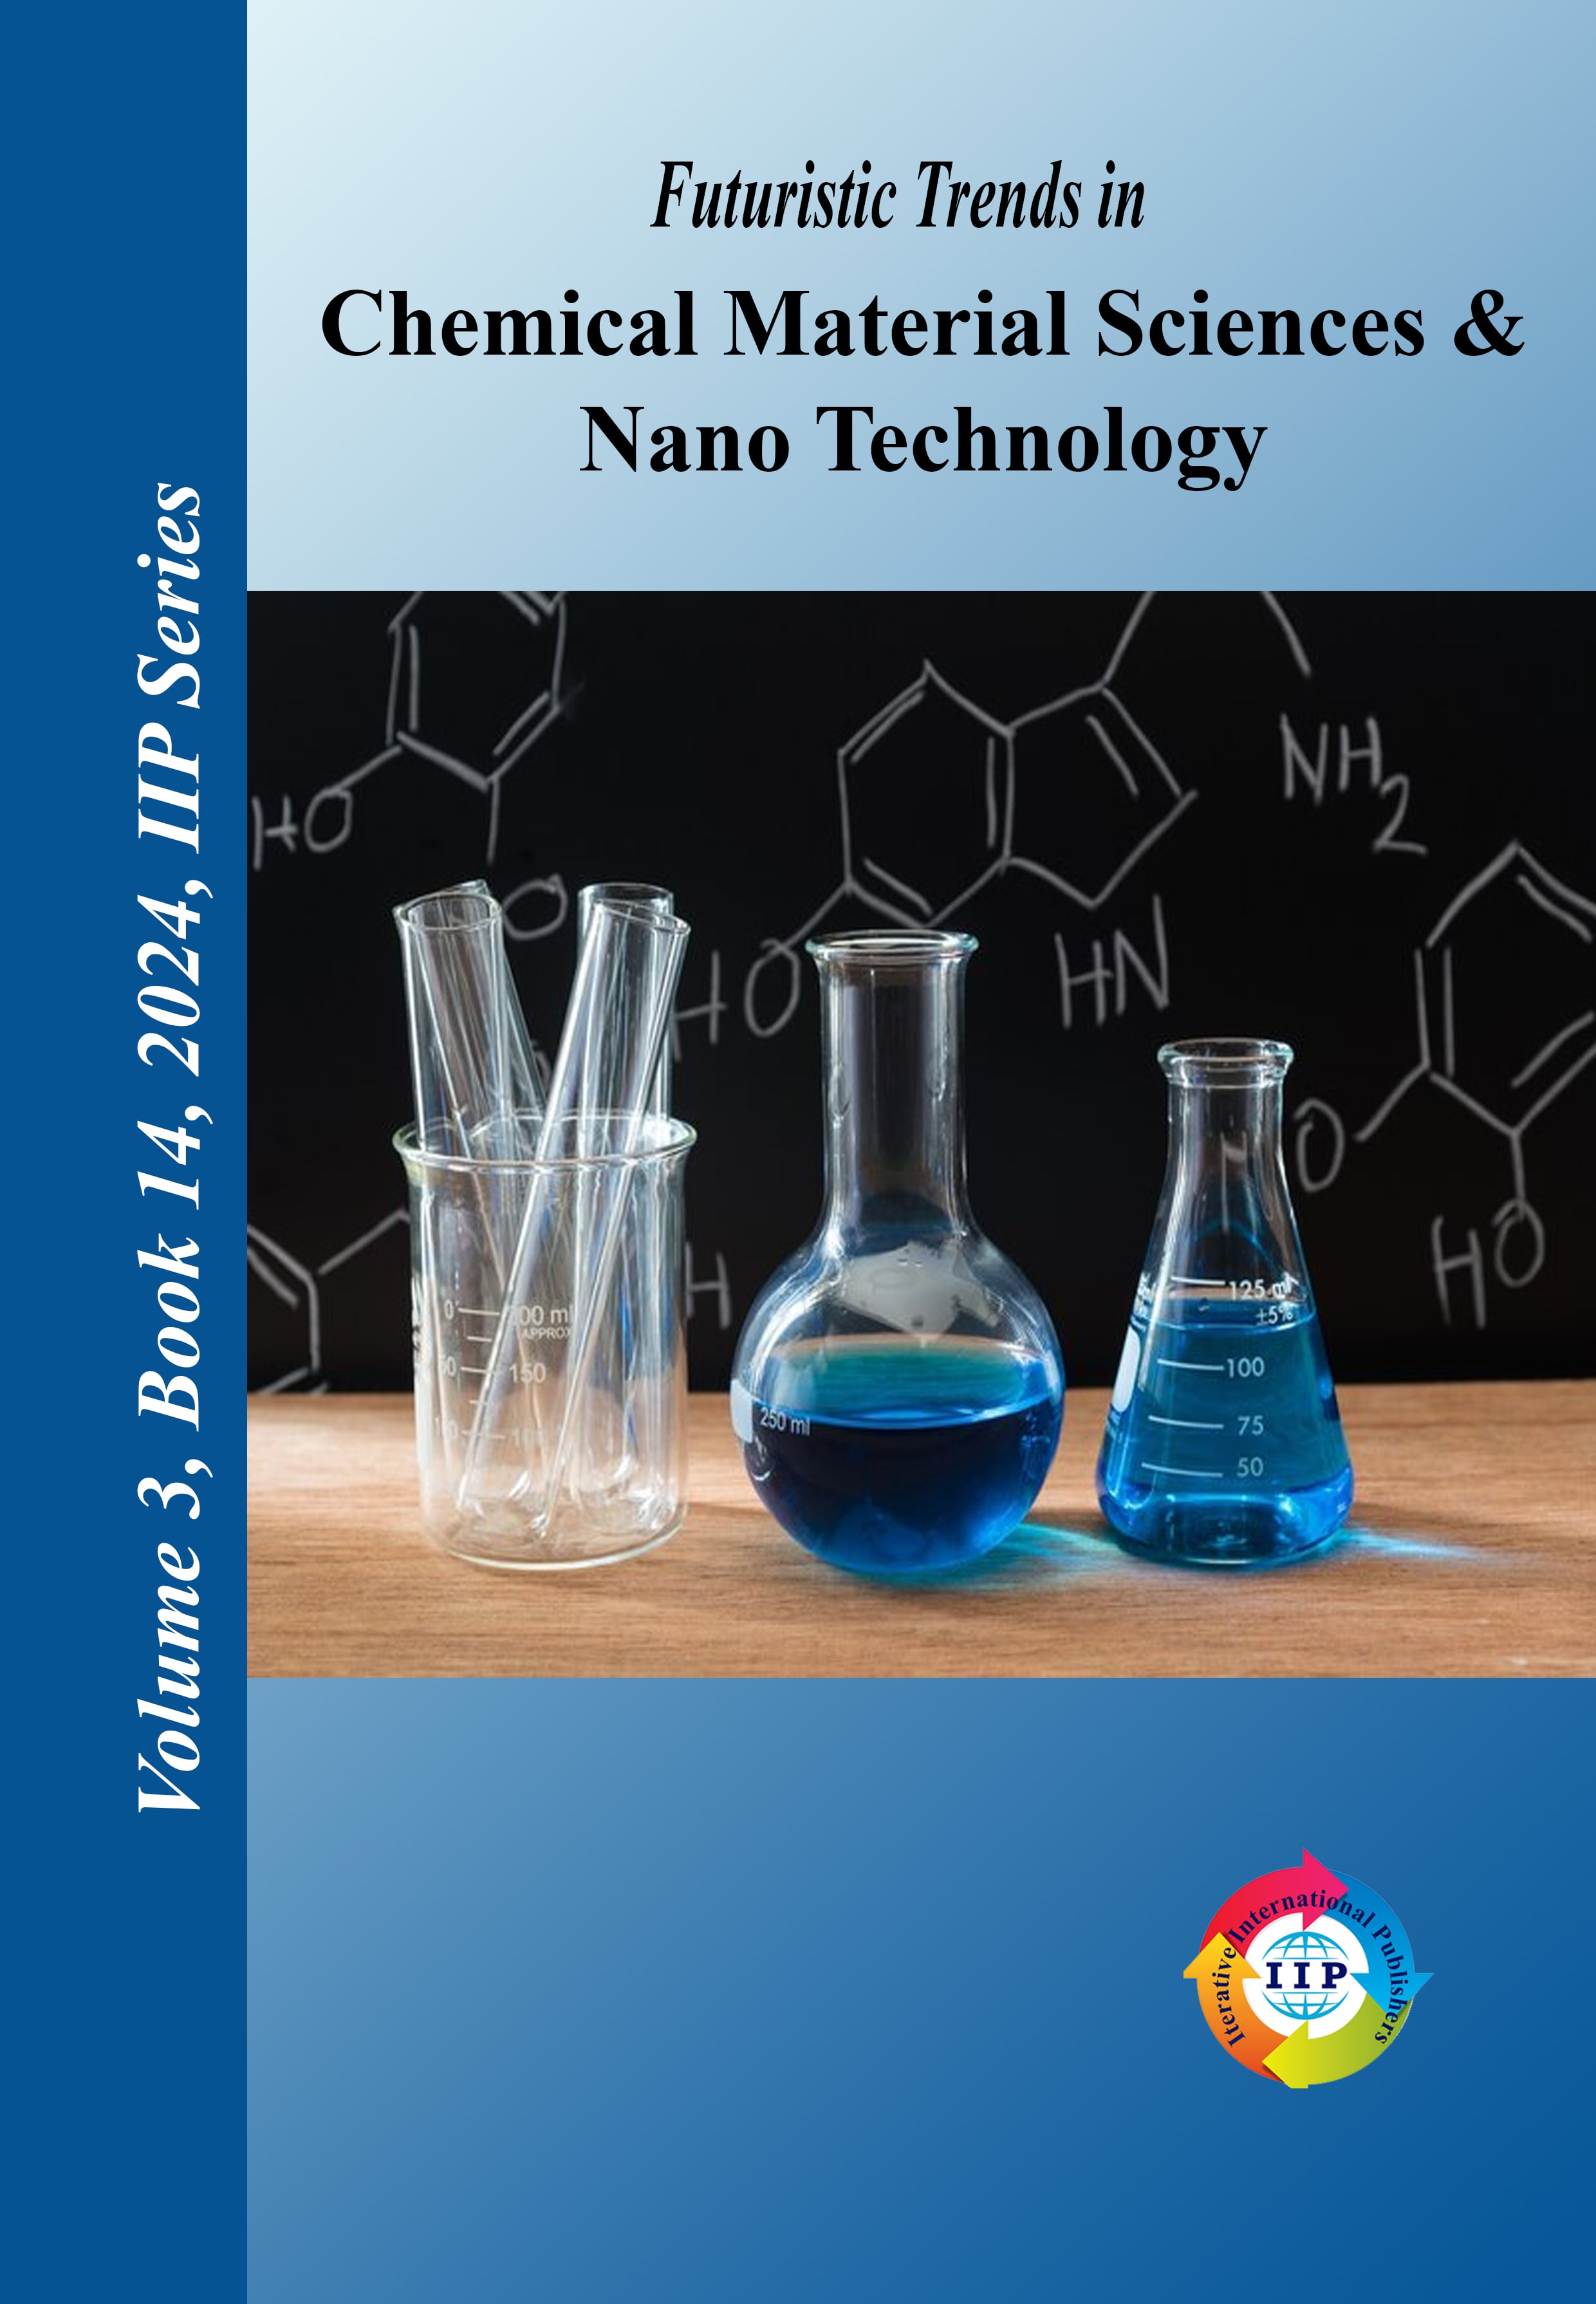 Futuristic Trends in Chemical Material Sciences & Nano Technology  Volume 3 Book 14